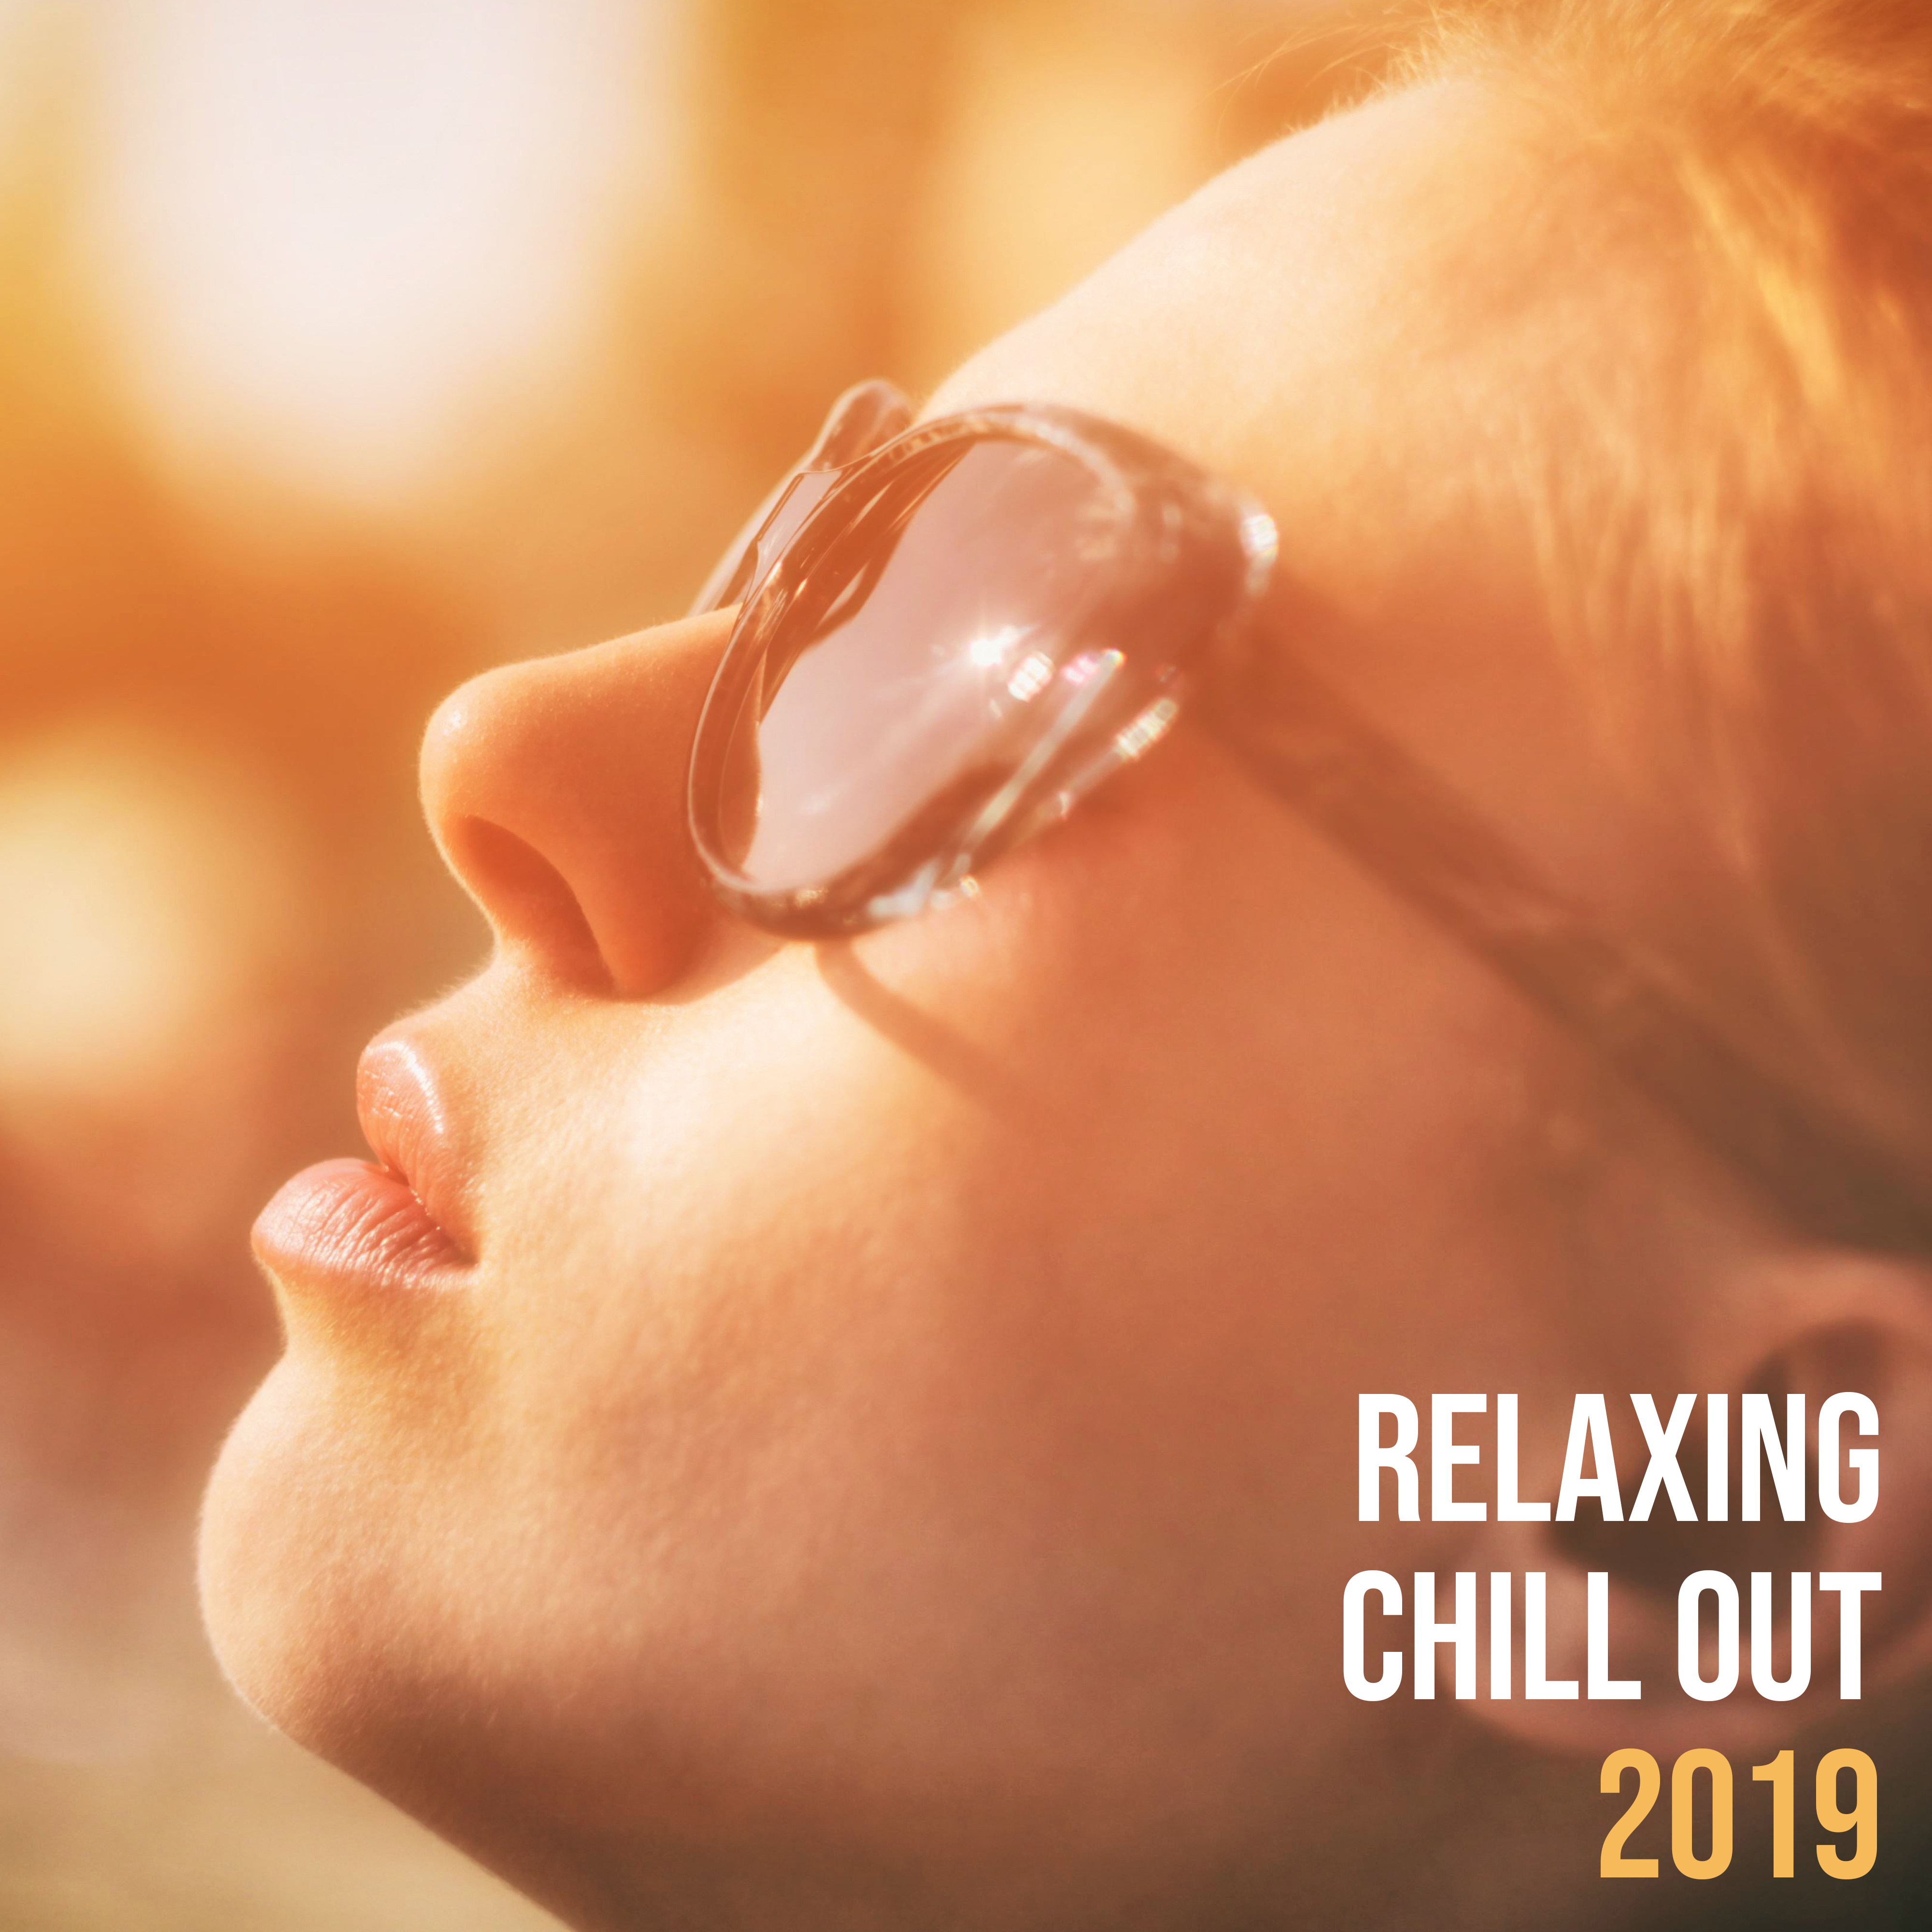 Relaxing Chill Out 2019  Calming Beats for Relaxation, Rest, Zero Stress, Relax Zone, Chill Tunes, Smooth Music